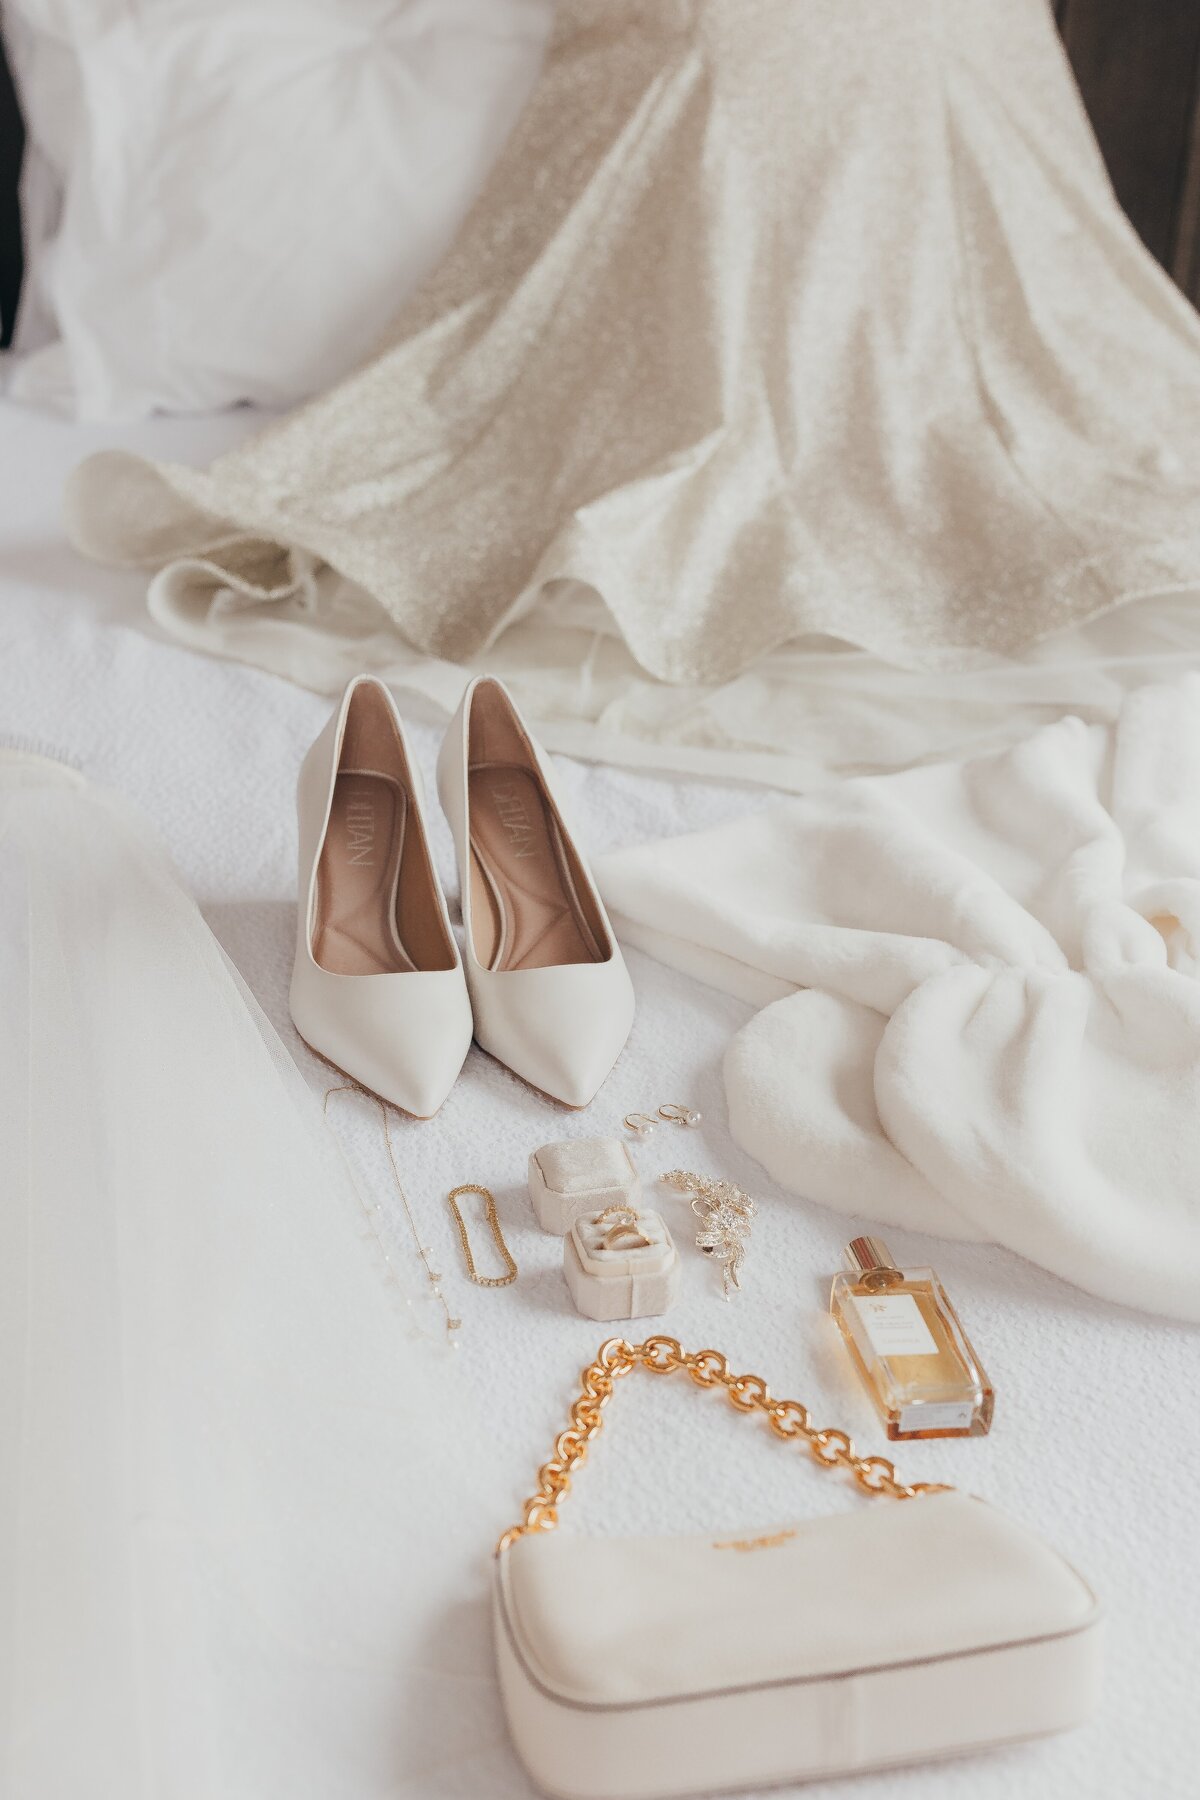 A pair of white high-heeled shoes, jewelry, and a purse arranged on a soft fabric surface near a flowing white dress, ideal for Iowa weddings.